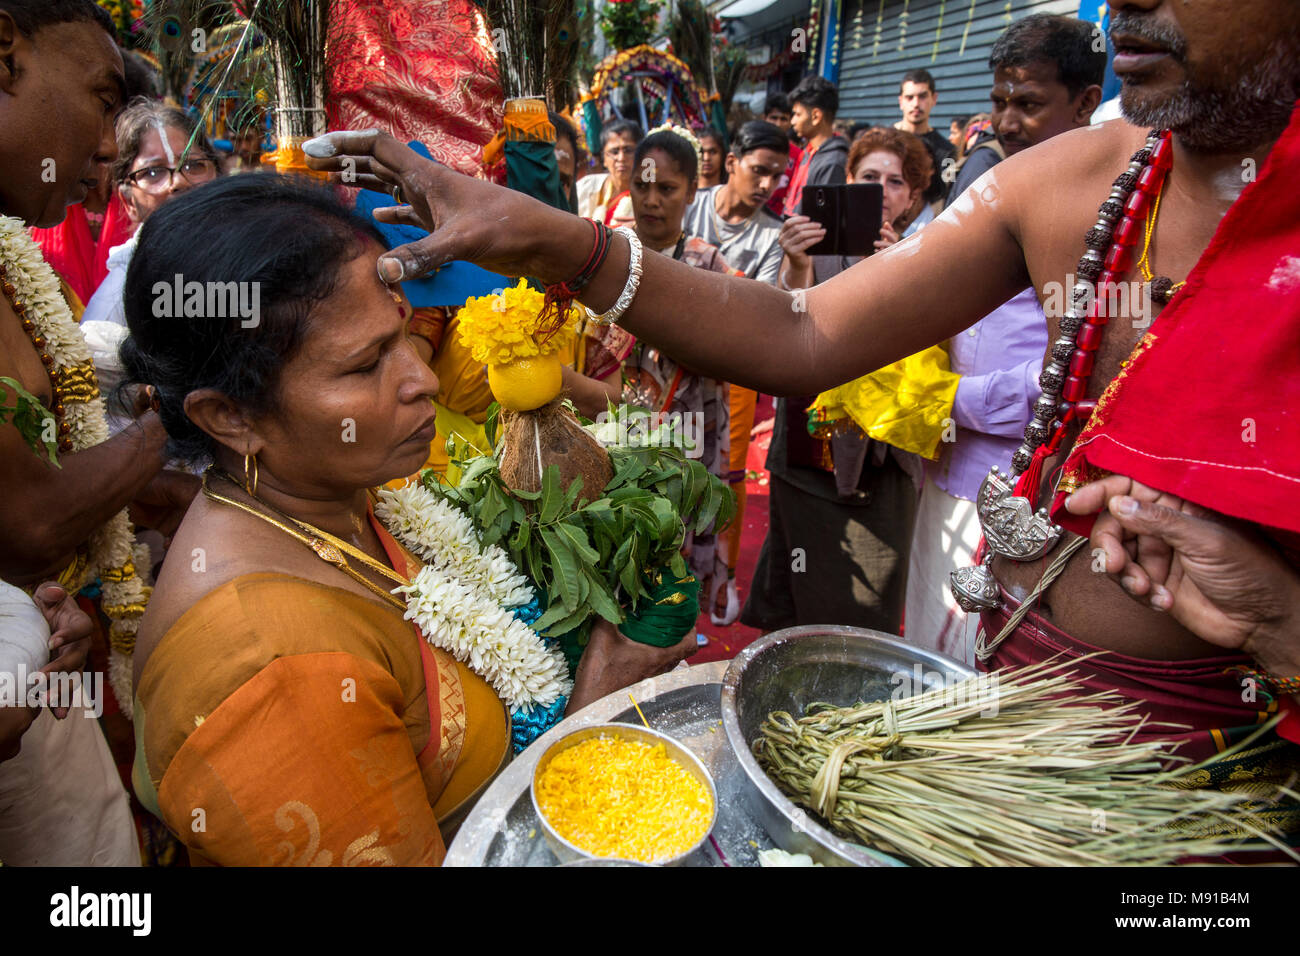 Ganesh festival in Paris. Blesssing of participants. France. Stock Photo